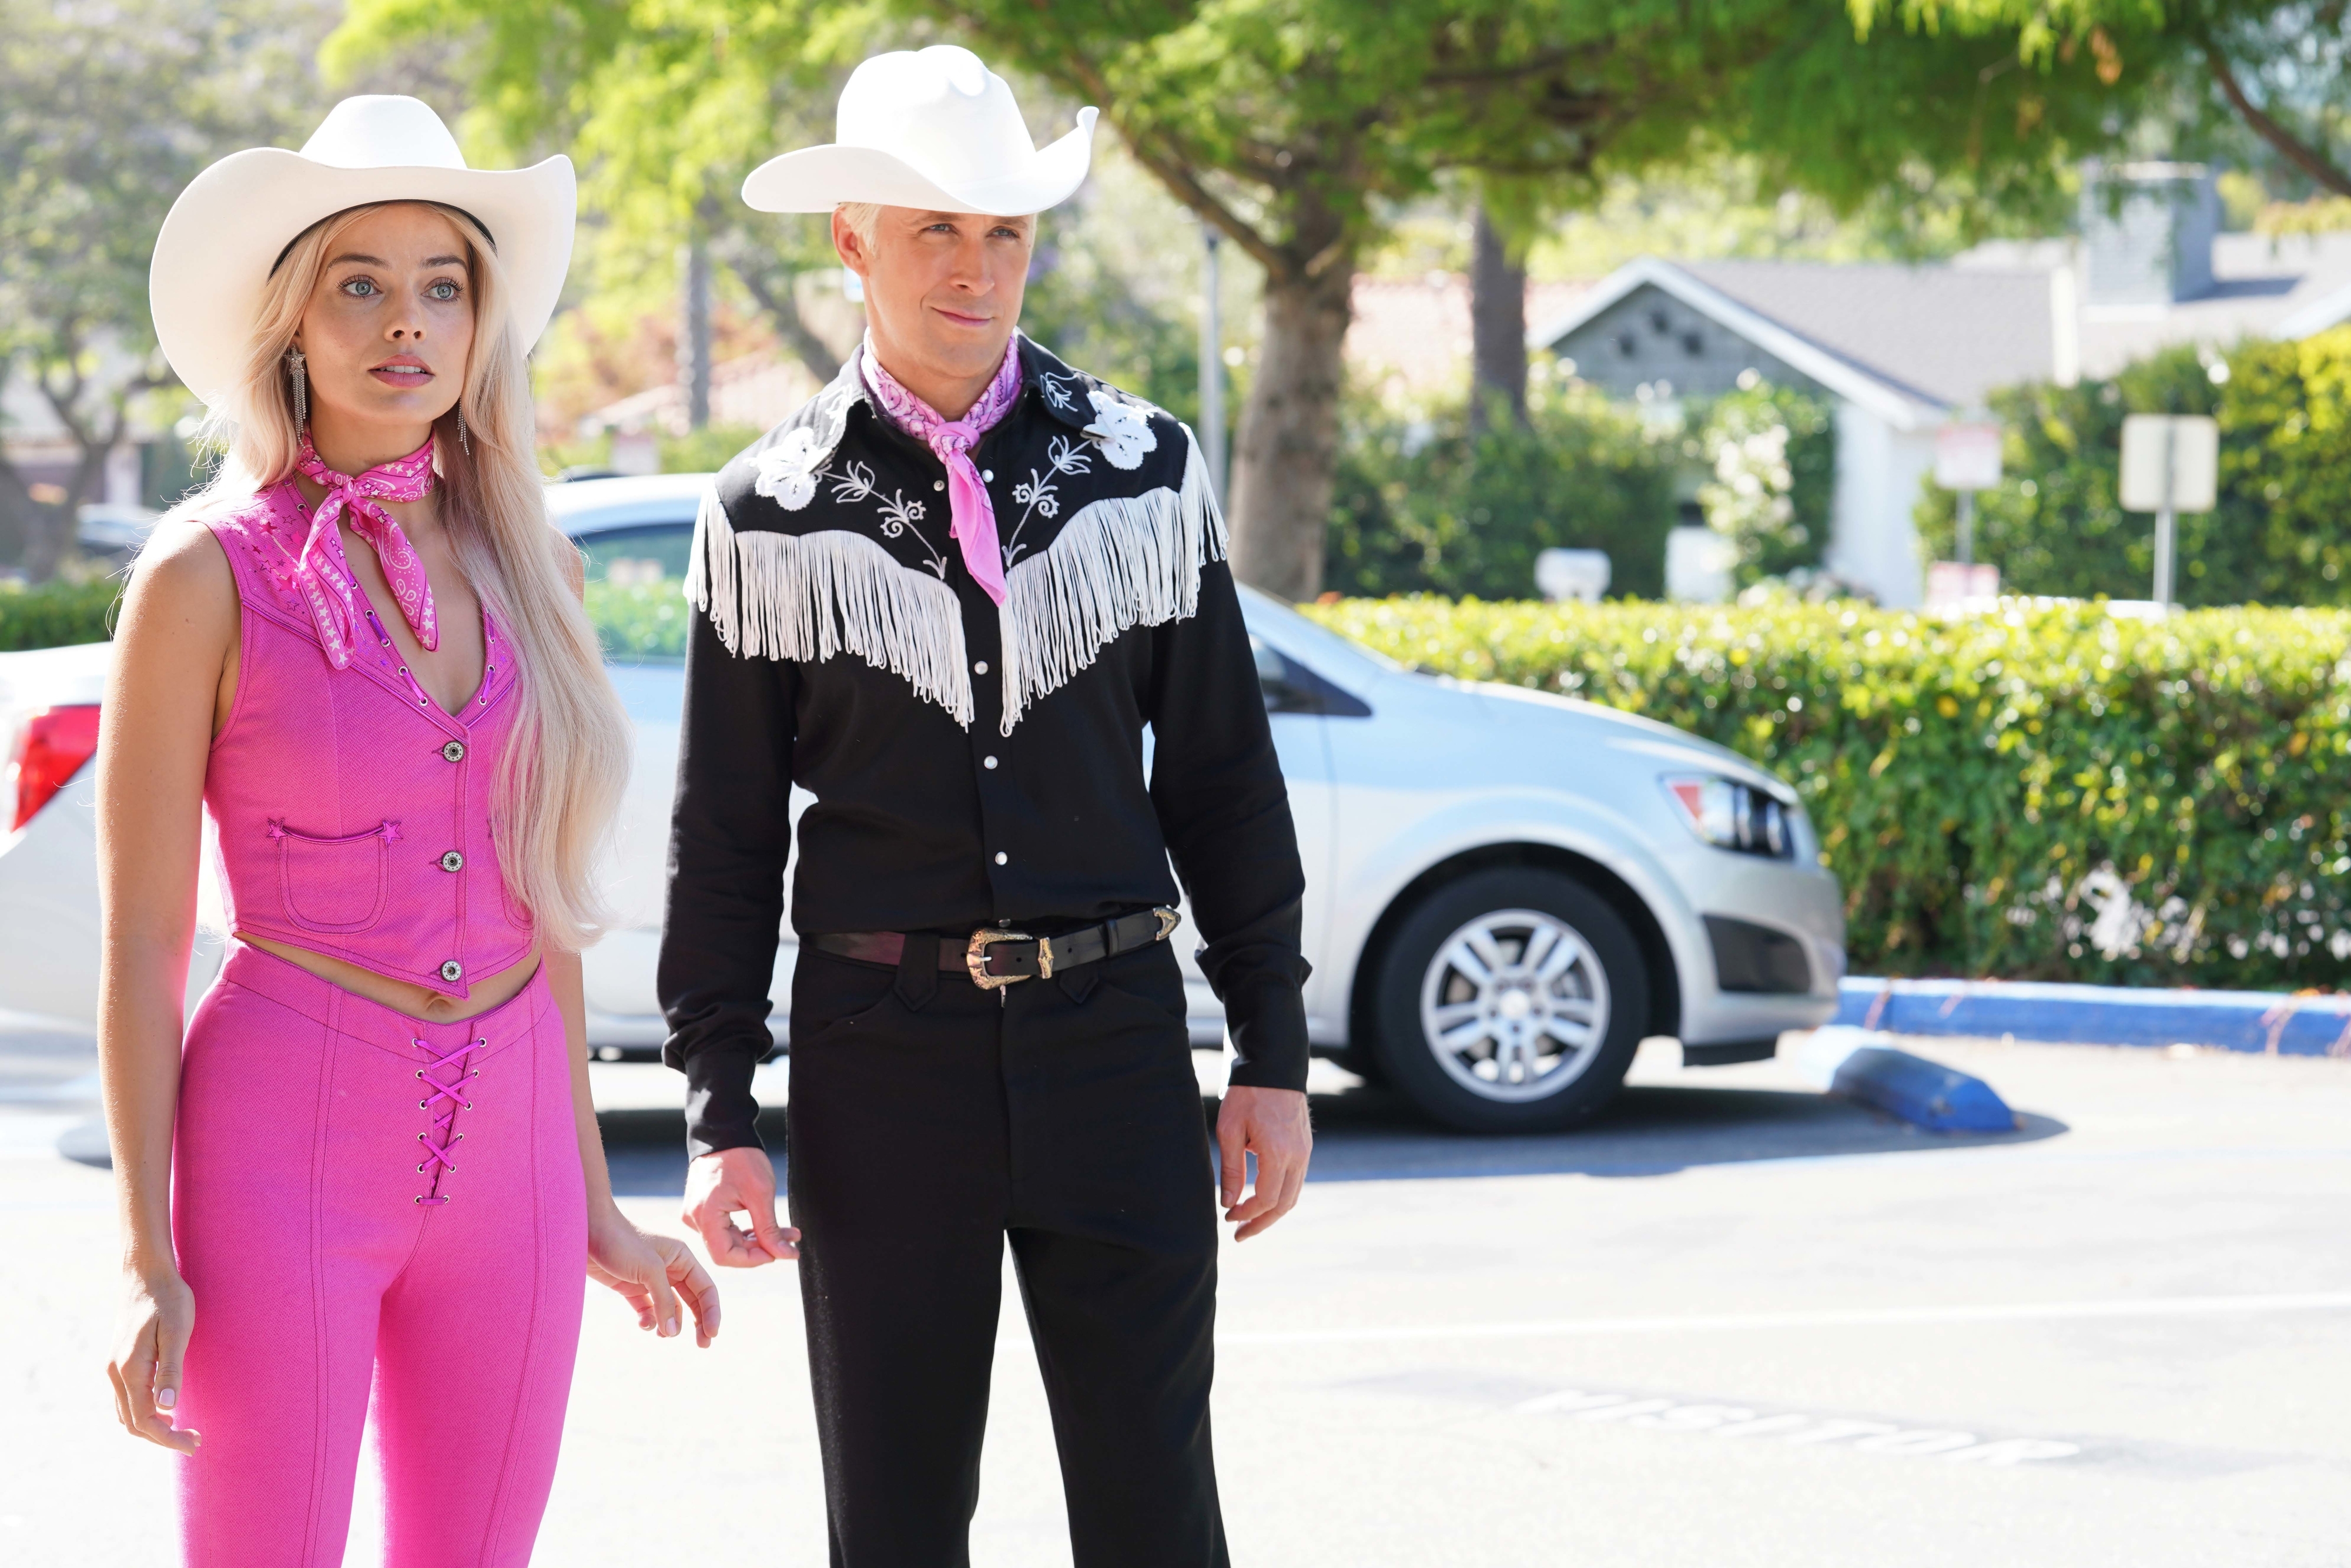 Barbie and Ken standing outside in western style clothing